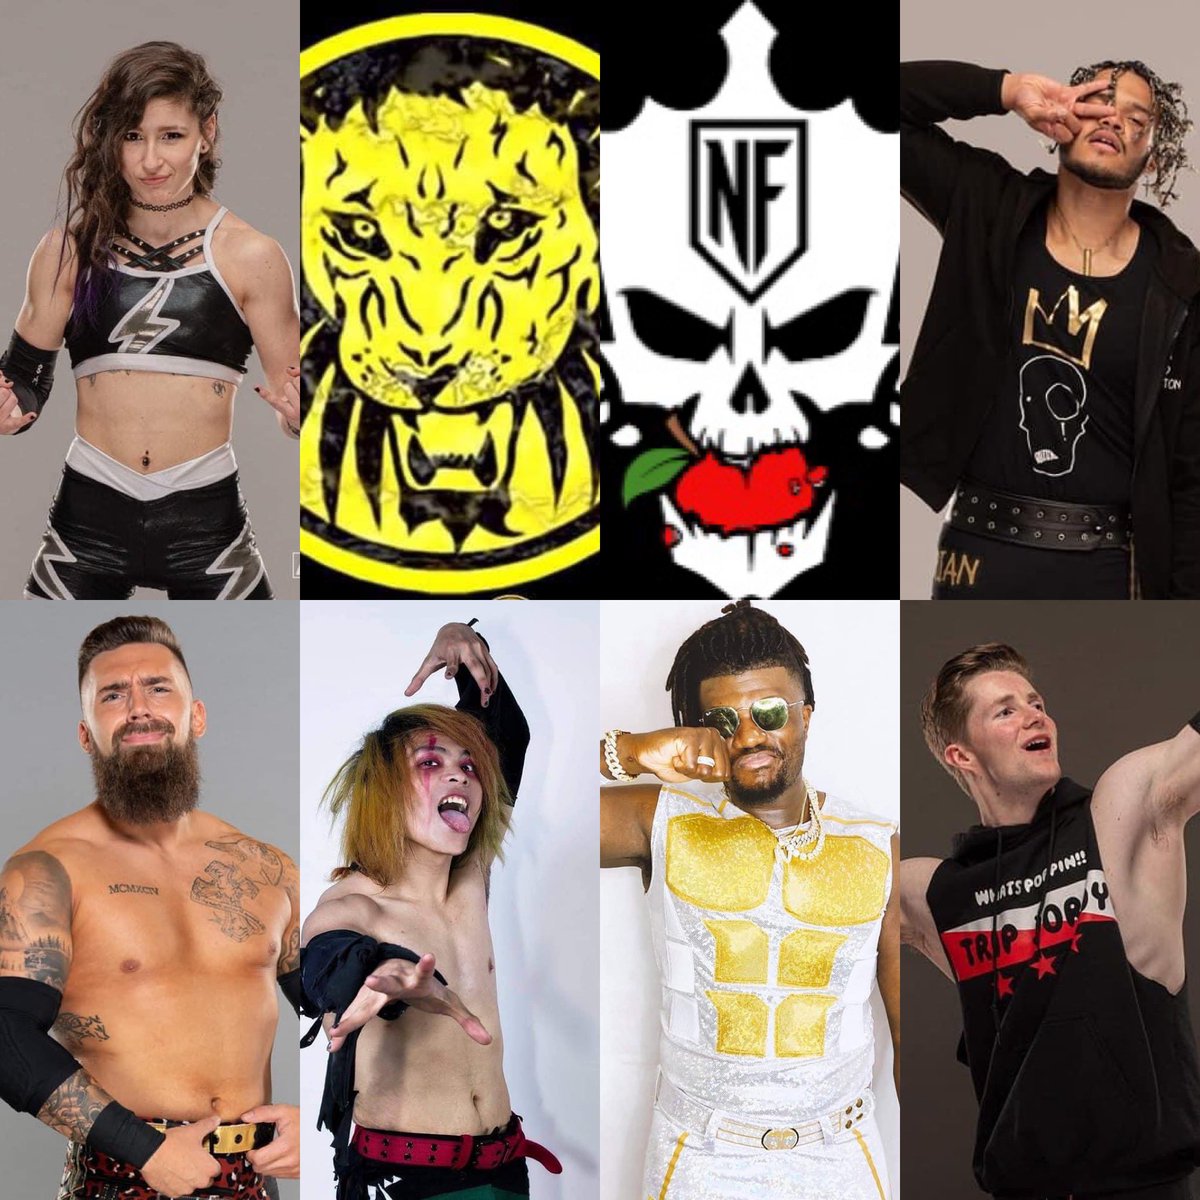 Young Lion’s Cup 2021…
It’s the Nightmare Factory take over!

We out here doing the work 💪
Gonna represent hard!!

@BrookeHavok 
@DarianBengston 
@thetrevoroutlaw 
@kiddbanditpro 
@IshmaelVaughn 
@TripJordy 

#aew #nightmarefactory #nightmarefamily #codyrhodes #qtmarshall